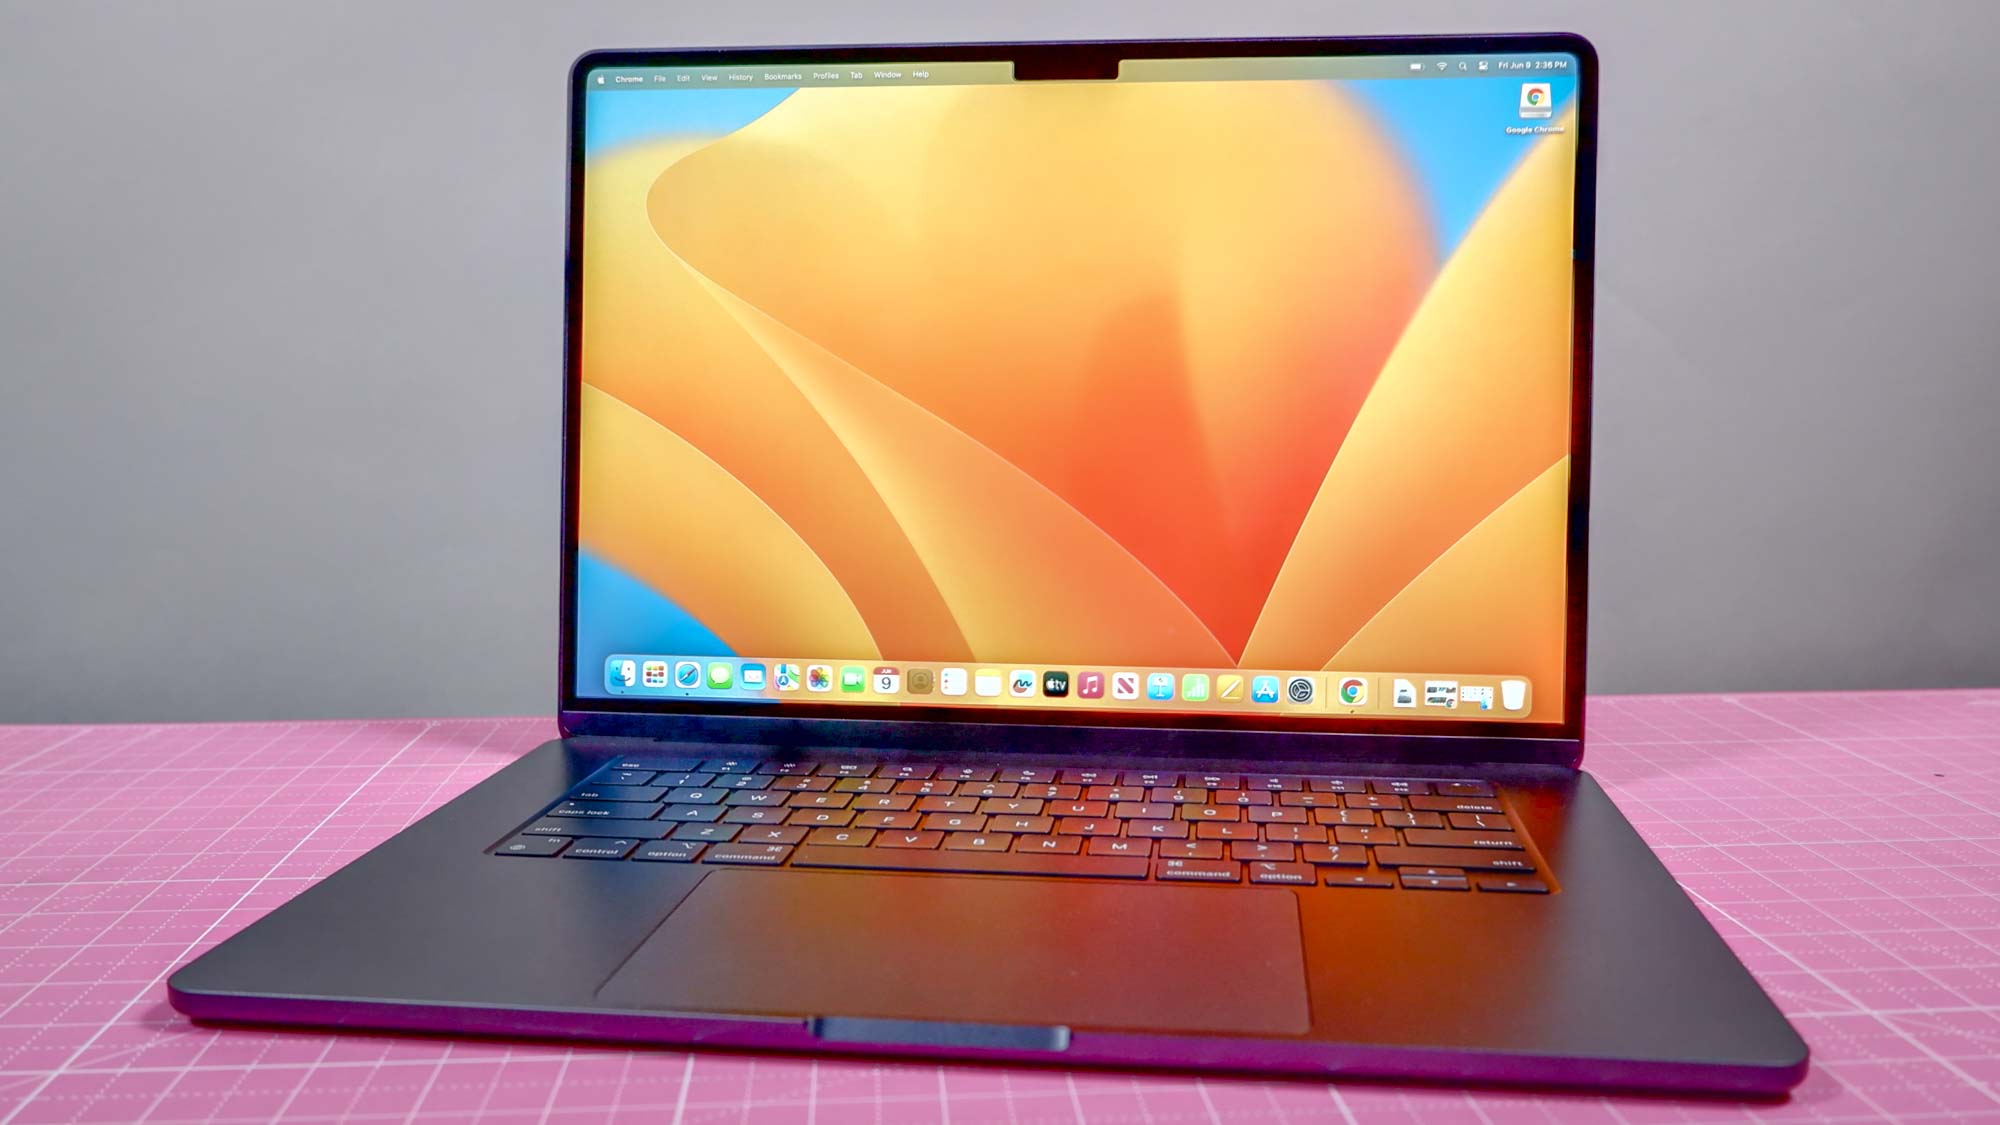 MacBook Air 15inch release date, price, specs and more Tom's Guide